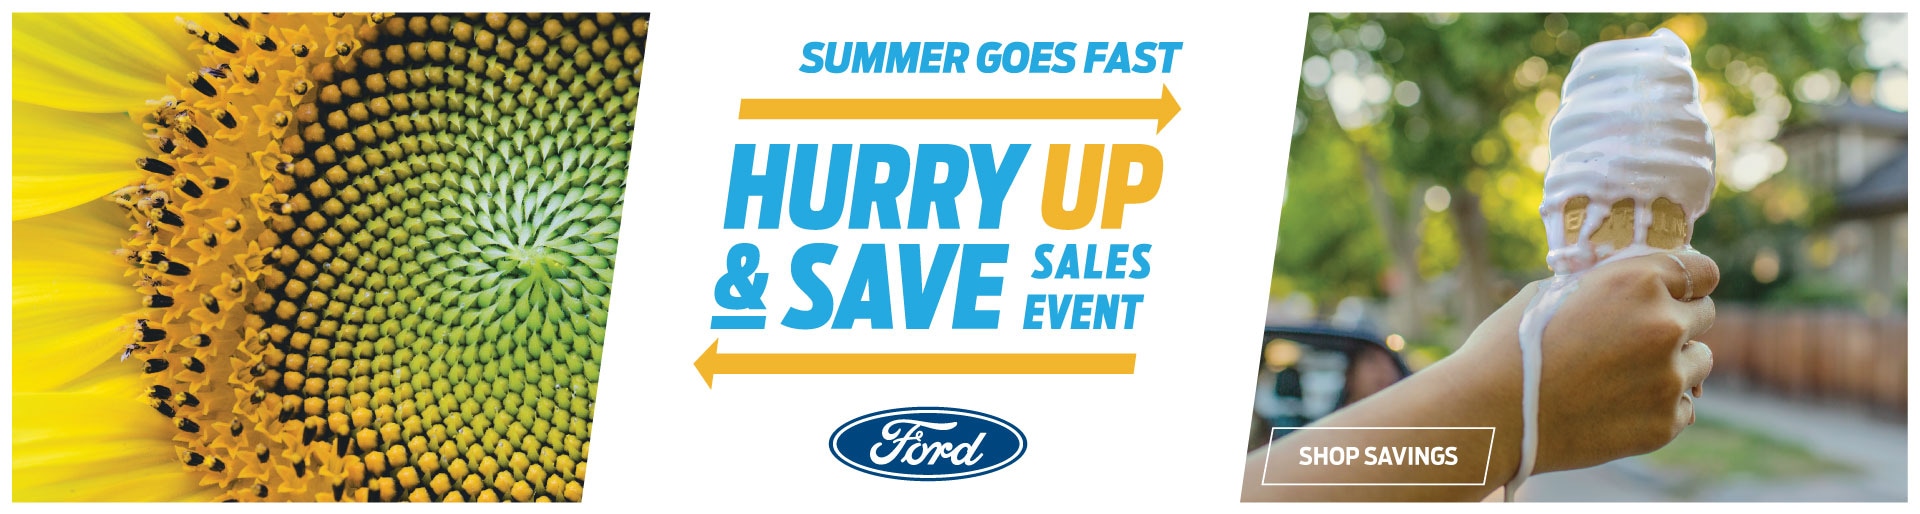 Ford Dealer Sacramento CA | New Ford, Certified Pre-Owned, & Used Car